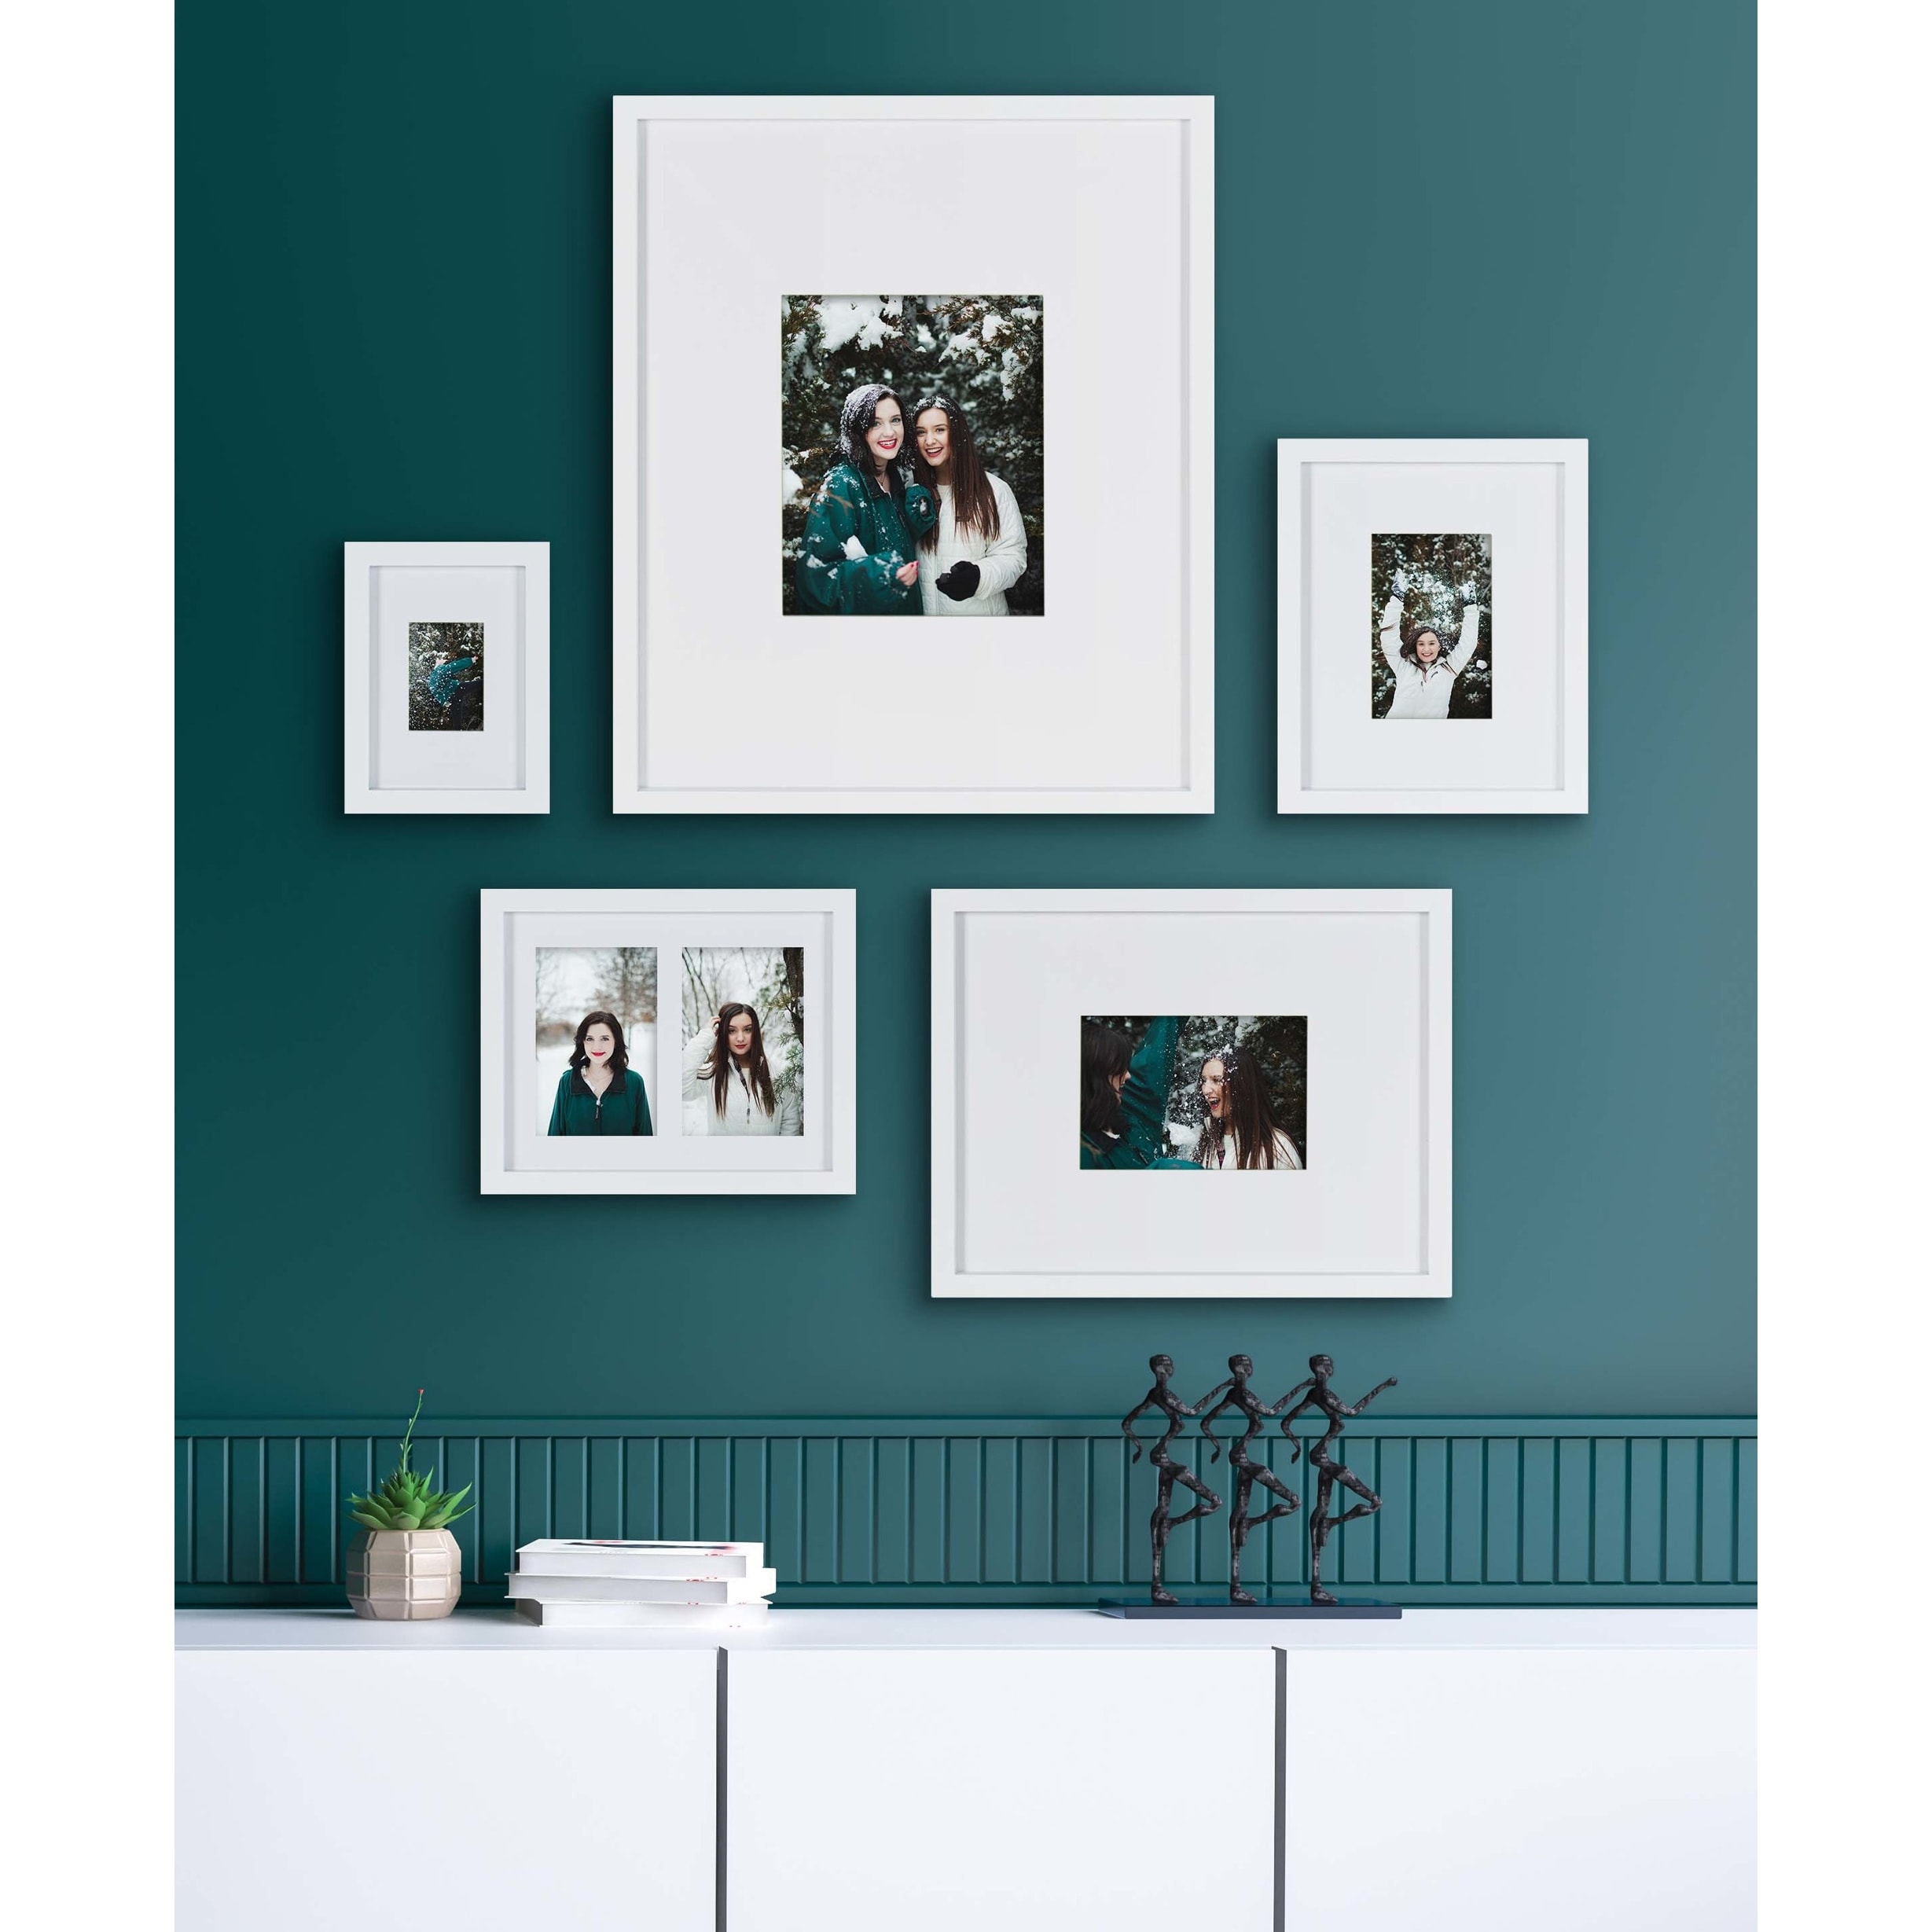 https://ak1.ostkcdn.com/images/products/is/images/direct/8a5083ed2ba2e3bb9b864fc29b71cdac9505959e/Kate-and-Laurel-Gallery-Wall-Matted-Picture-Frame-Set.jpg